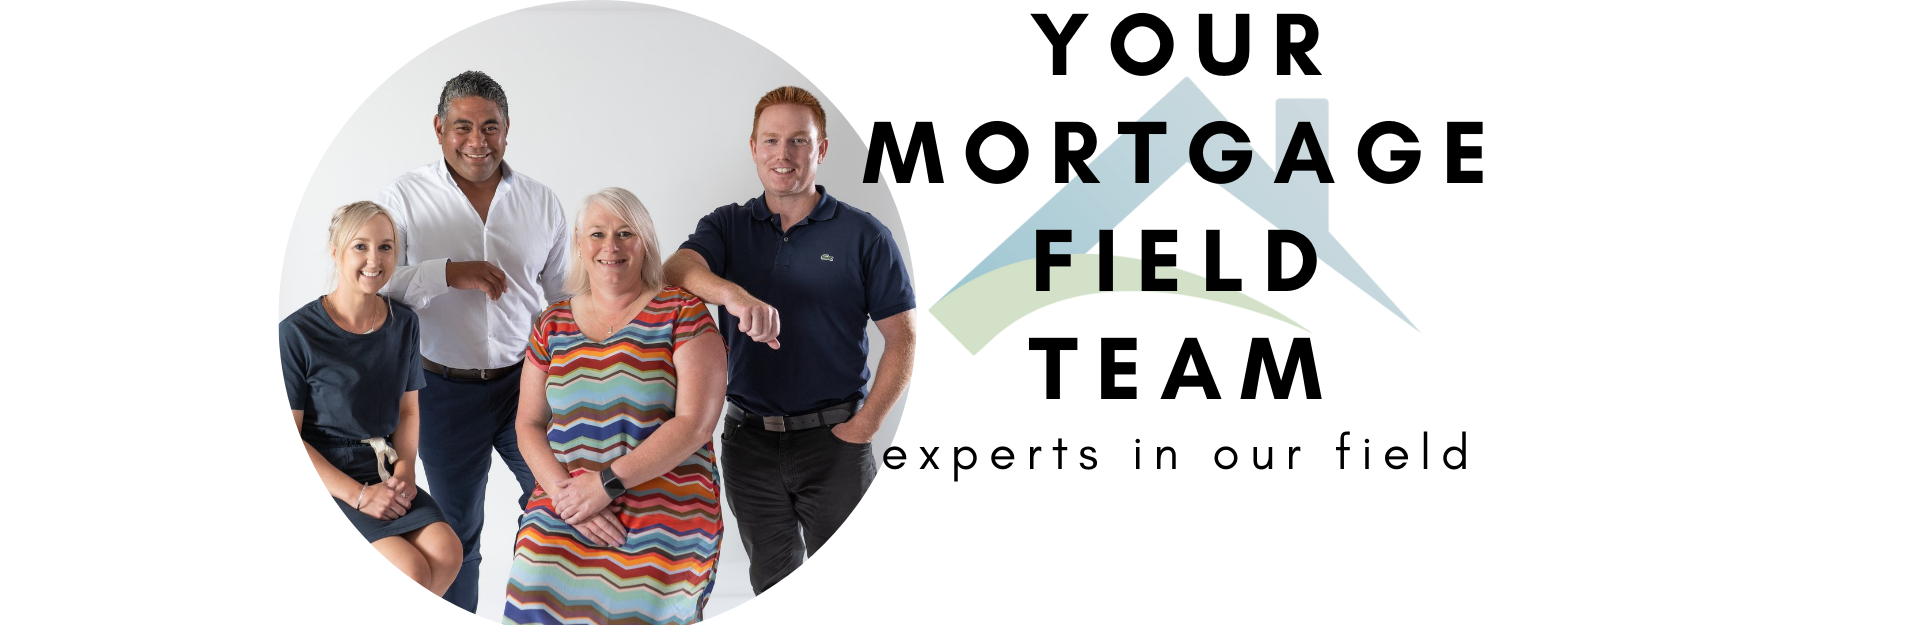 Mortgage_field_team_banner.png